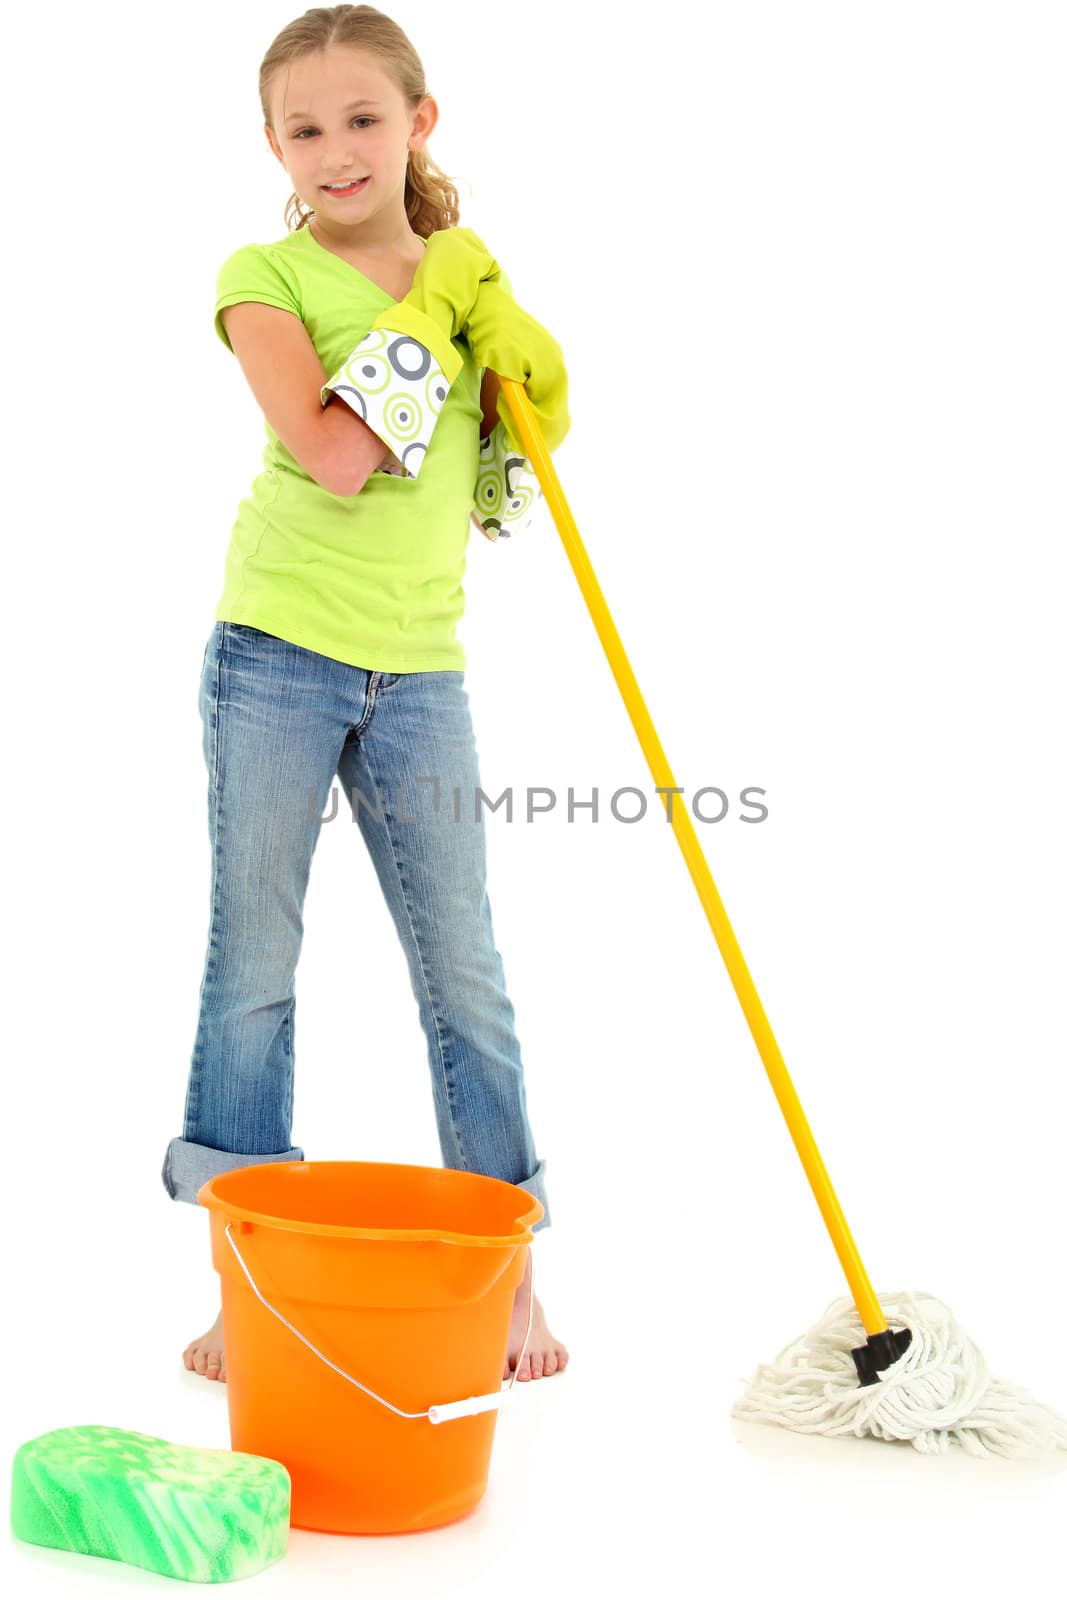 Beautiful Young Girl Doing Spring Cleaning Chores with Mop and Bucket barefoot over white background.